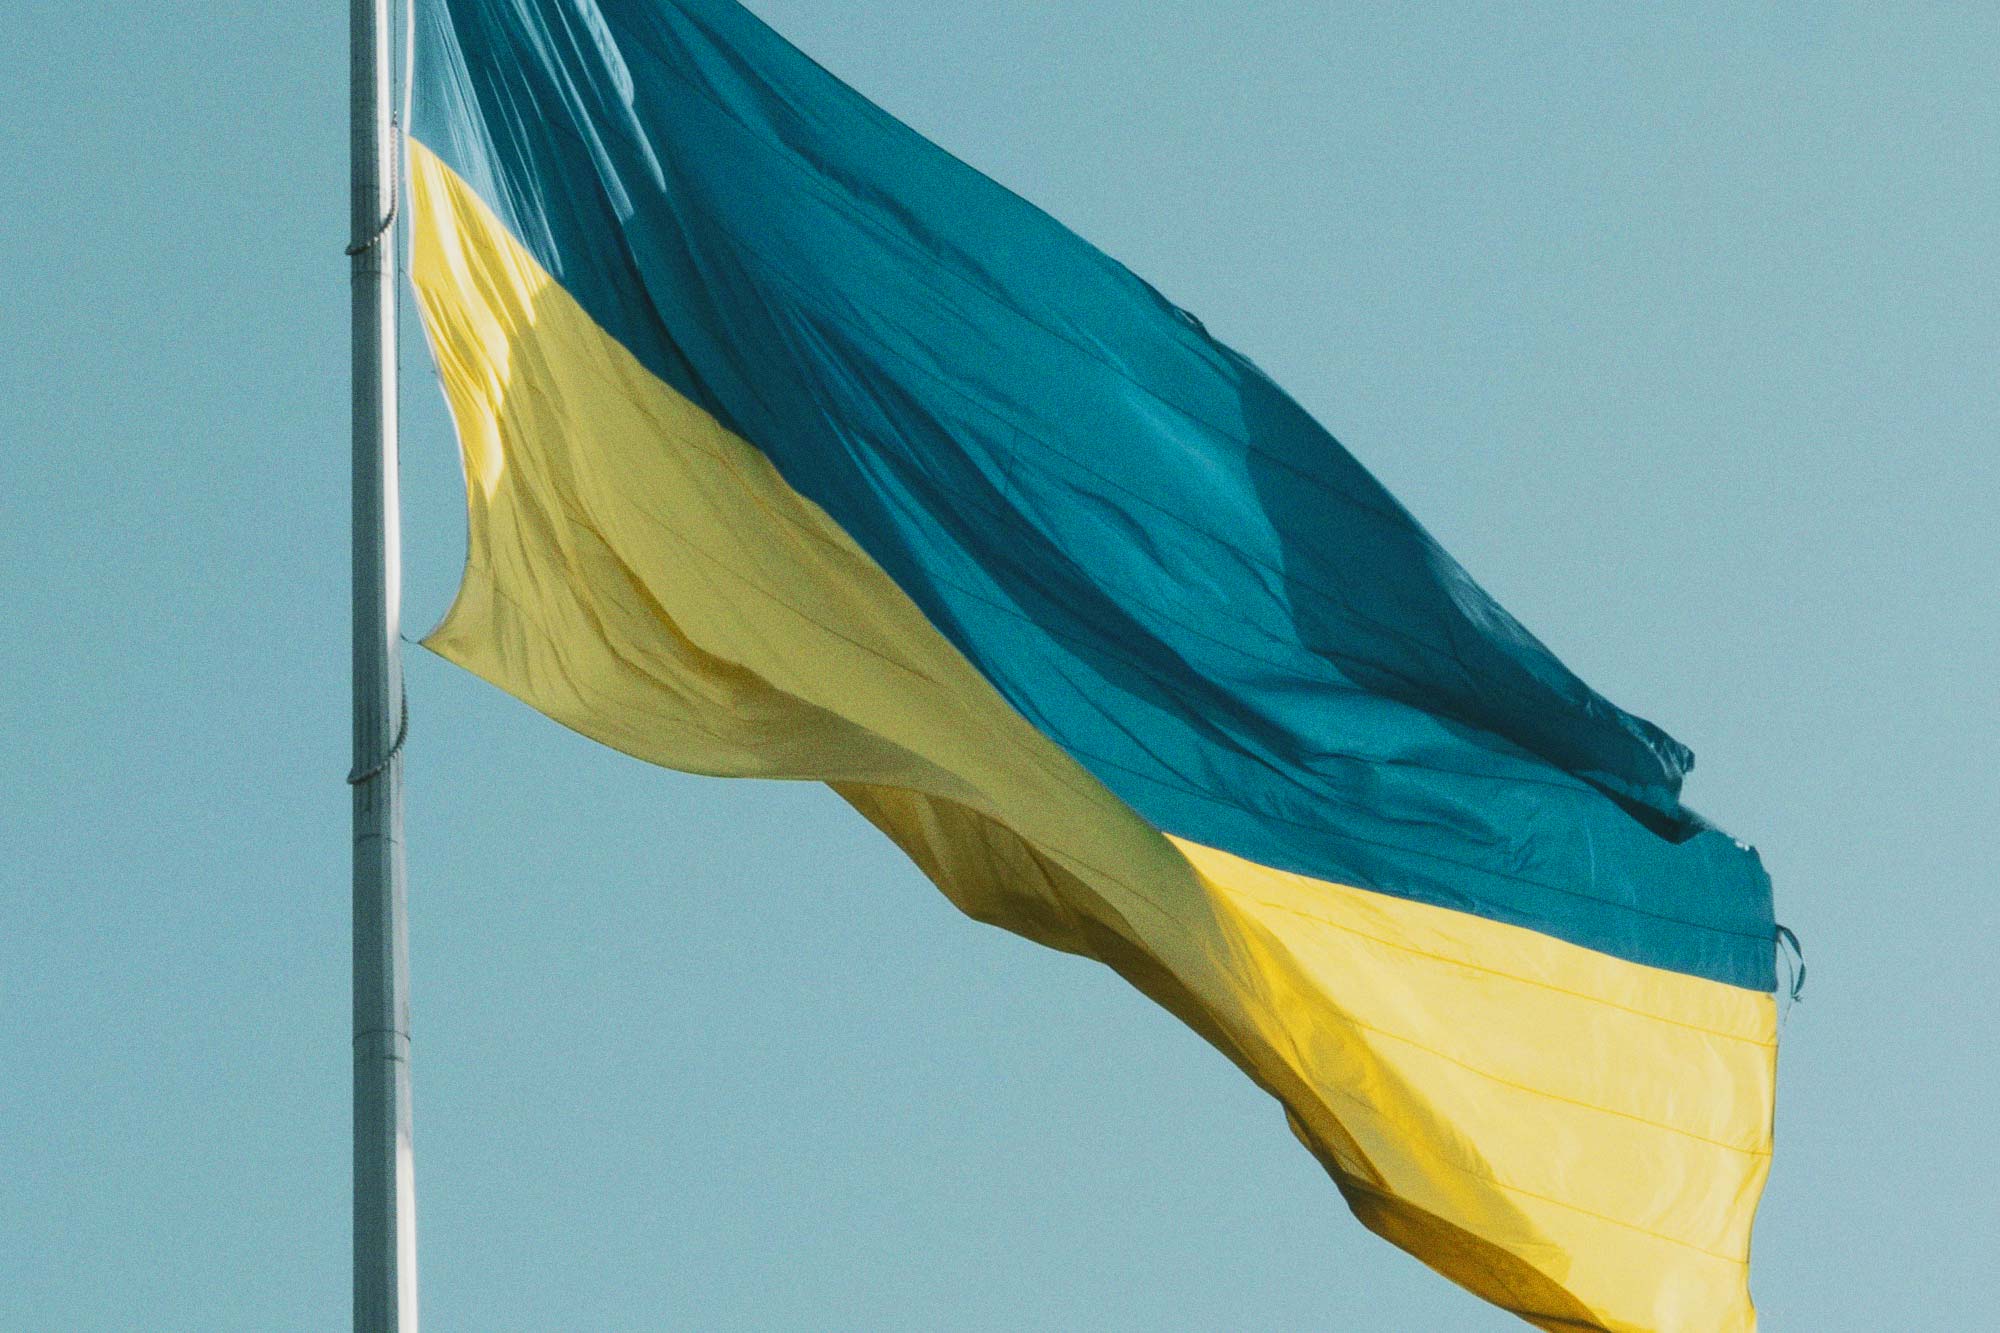 The teal and yellow flag of Ukraine flies in the wind on a clear day